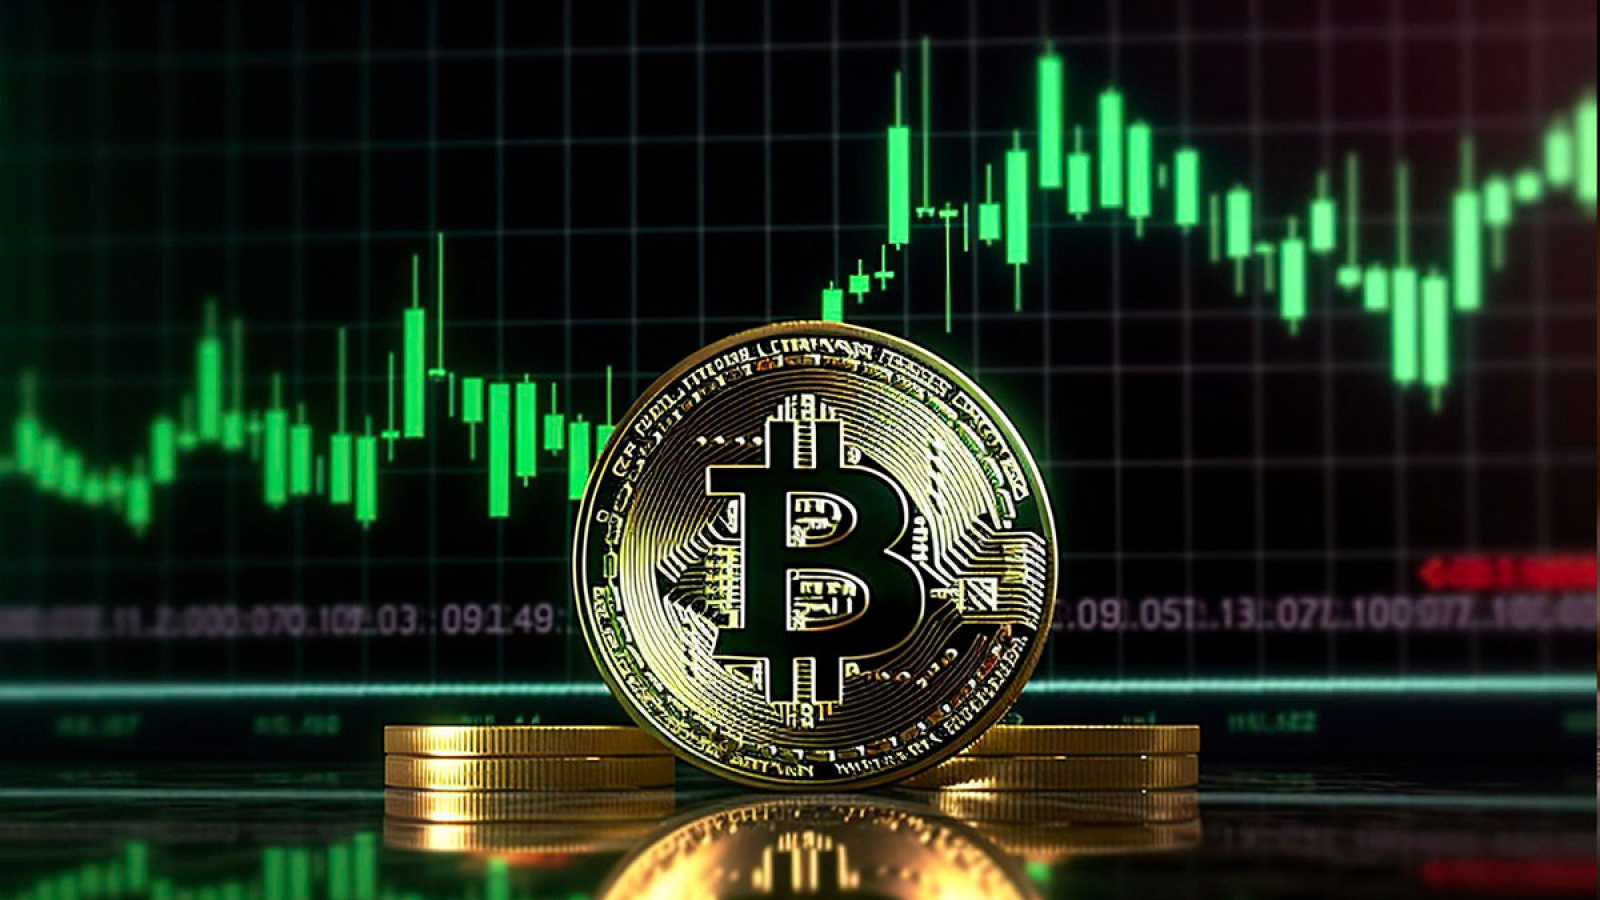 Bitcoin Price Action Explained: Here's Real Reason Why BTC Dipped